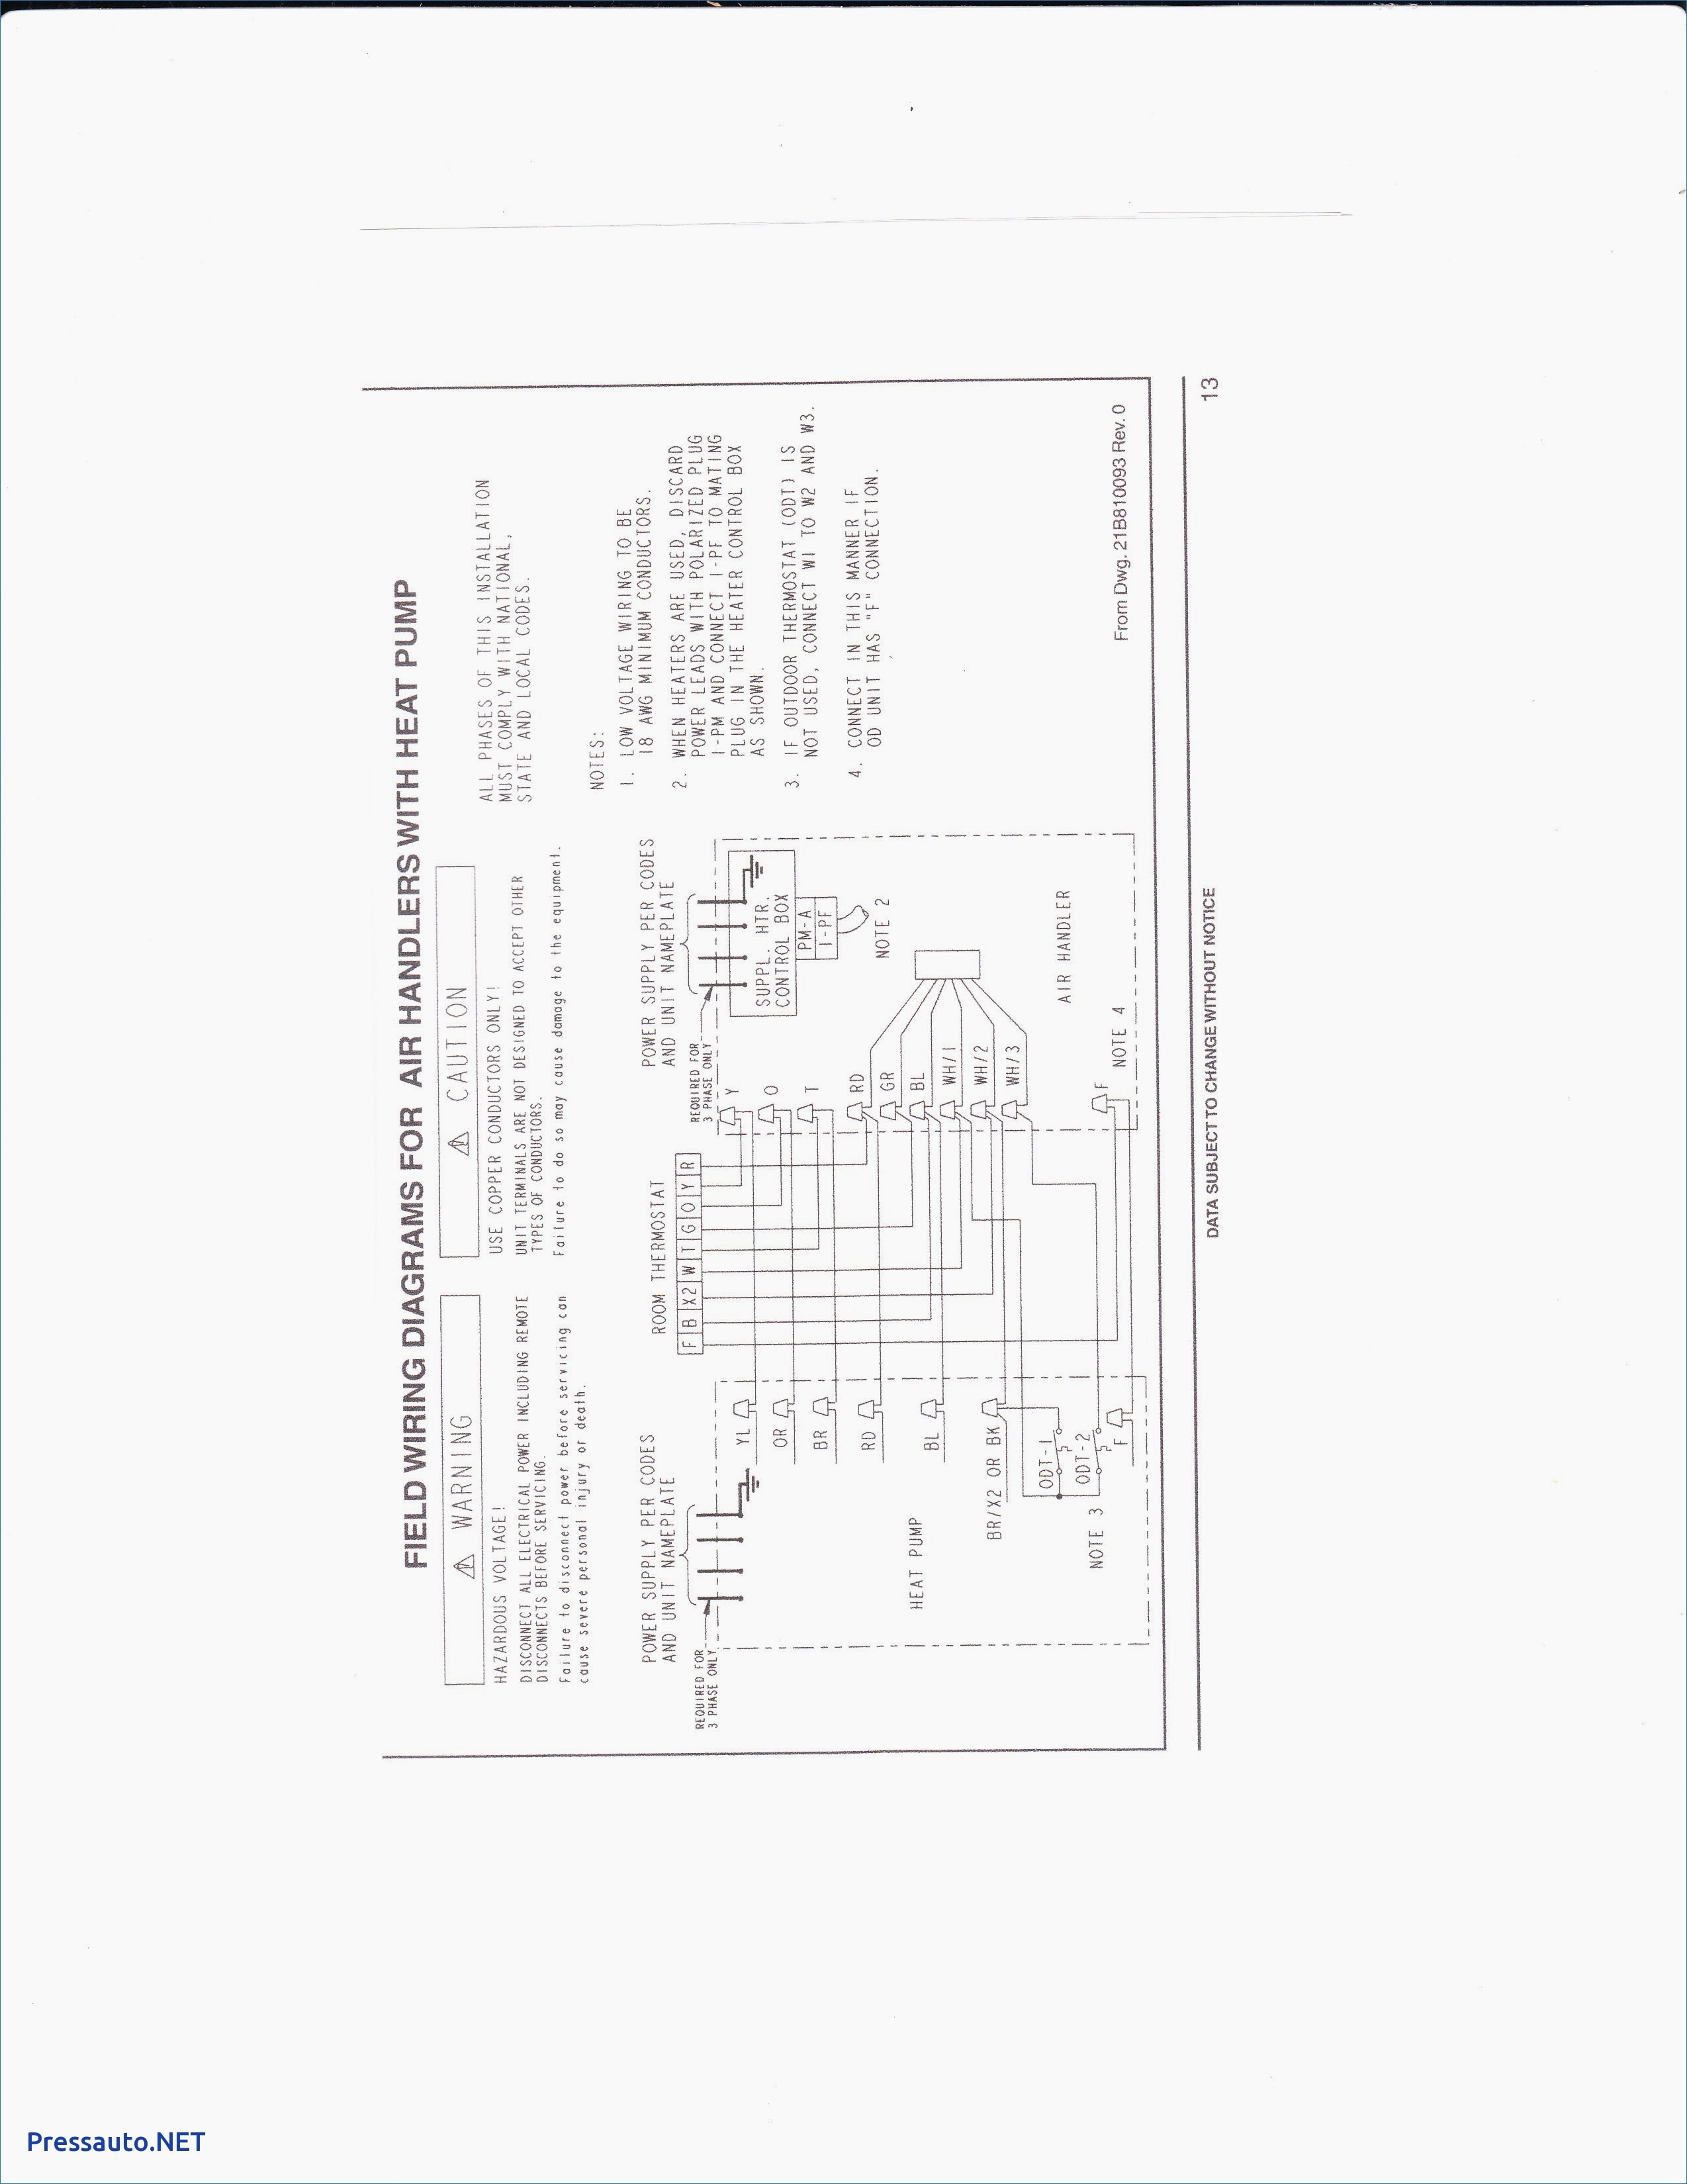 Wiring Diagram For York Air Conditioner New Air Conditioner Wiring Diagram Picture Beautiful York Wiring